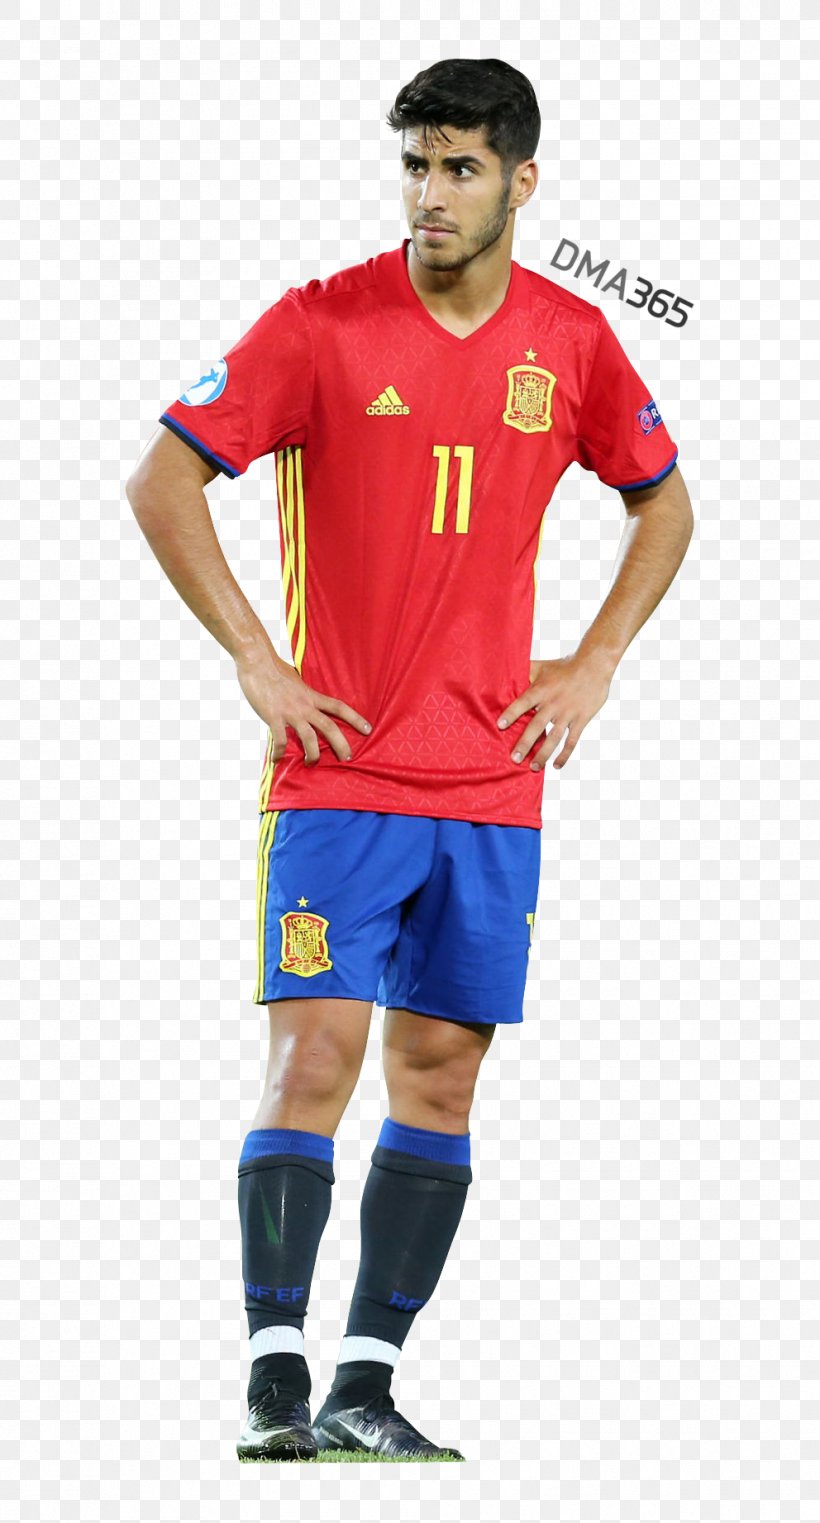 Marco Asensio Jersey Soccer Player Football Sport, PNG, 992x1843px, Marco Asensio, Clothing, Cristiano Ronaldo, Football, Football Player Download Free